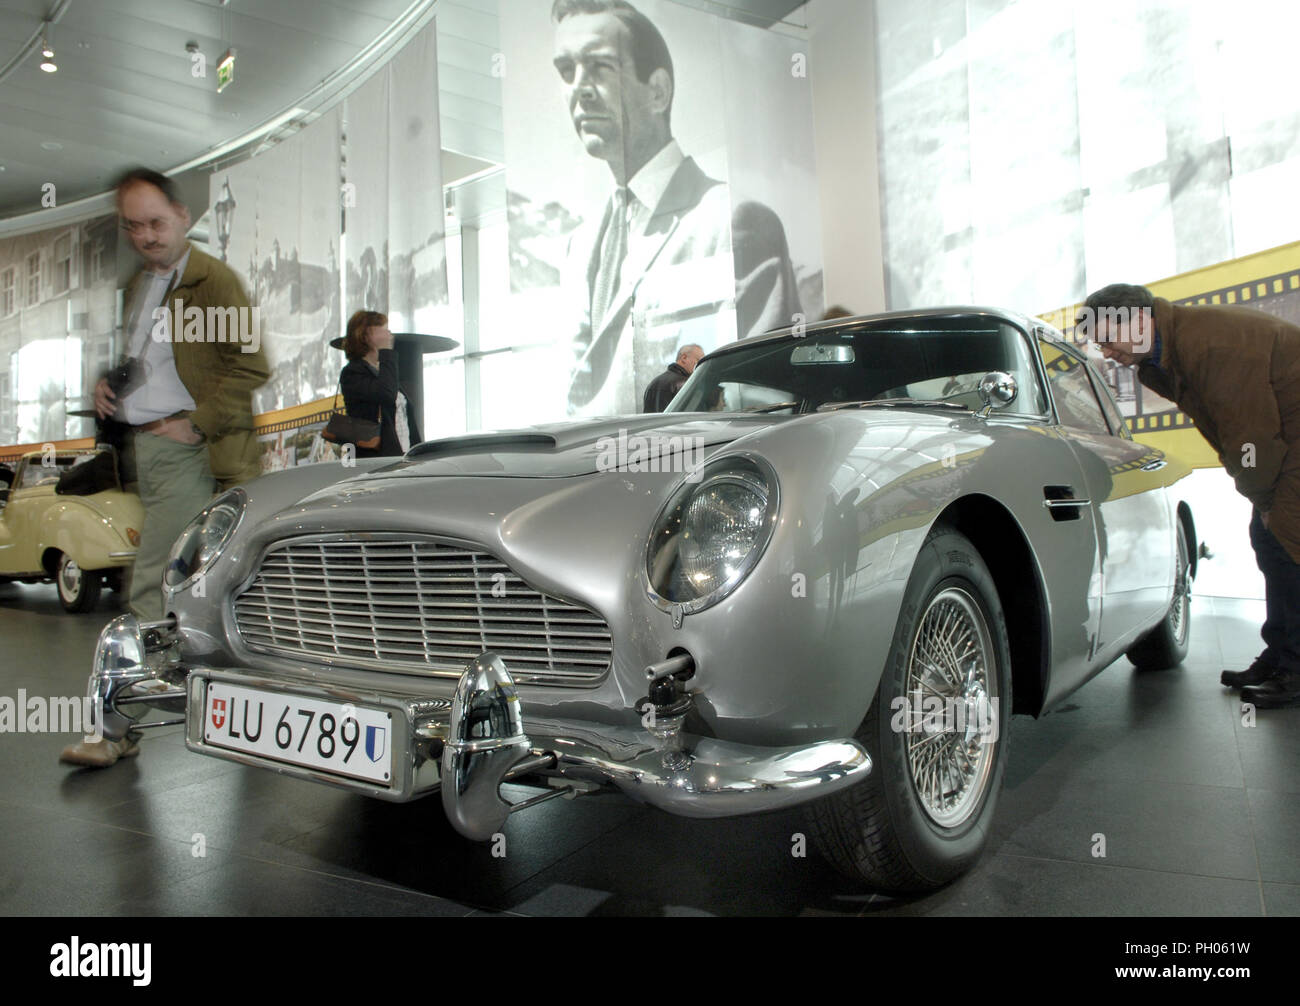 (dpa files) An Aston Martin DB5 pictured in the Audi museum in Ingolstadt, Germany, 17 April 2005. The car from the James-Bond-Film 'Goldfinger' starring Sean Connery is one of film history's cult cars still impressing with its special features like machine gun under the headlights, battering bumpers, bullet-proof windows, turnable code plates for every country, bearing transmitter, ejection seat and mist-, oil- and watersprayer. The silvergrey Aston Martin will get a new driver soon. Fans of 007 can auction their dream car on 20 February in Phoenix, Arizona, USA. The price is estimated to 1.5 Stock Photo